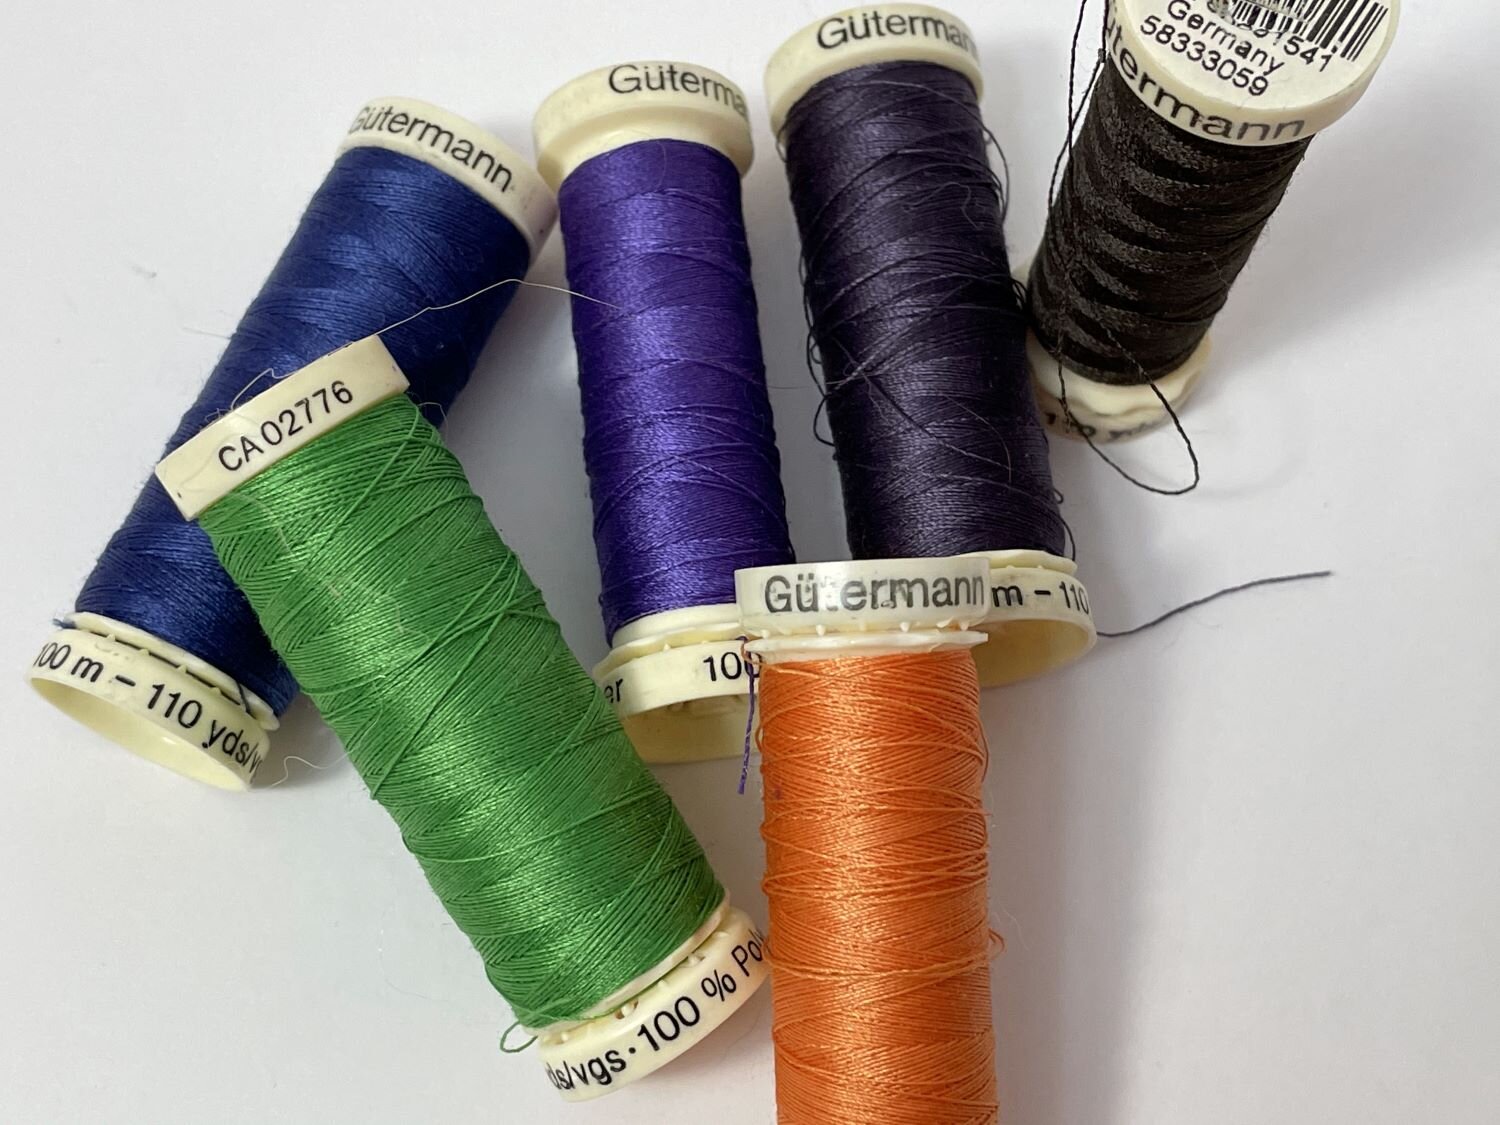 Heirloom Collection – wooden spools of thread